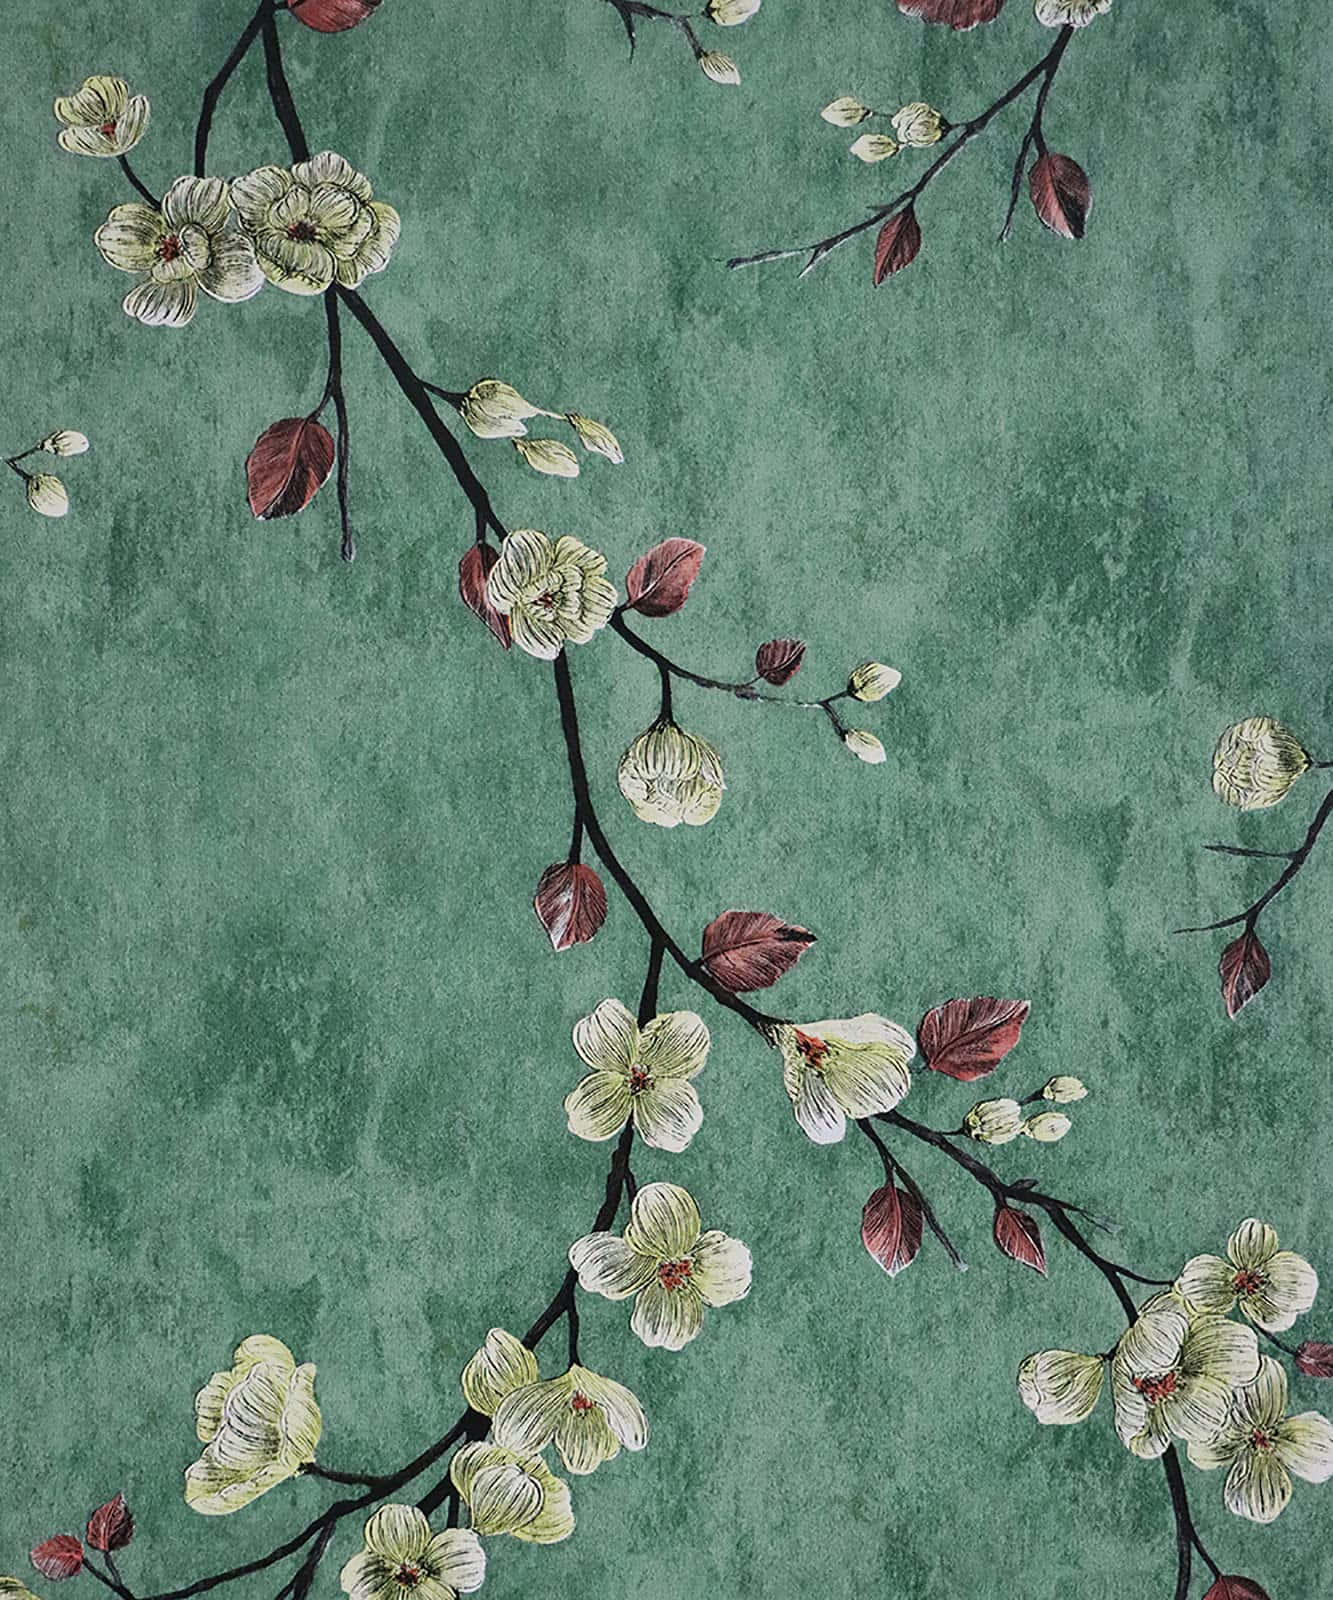 Aesthetic Flowers And Branch Painting Wallpaper